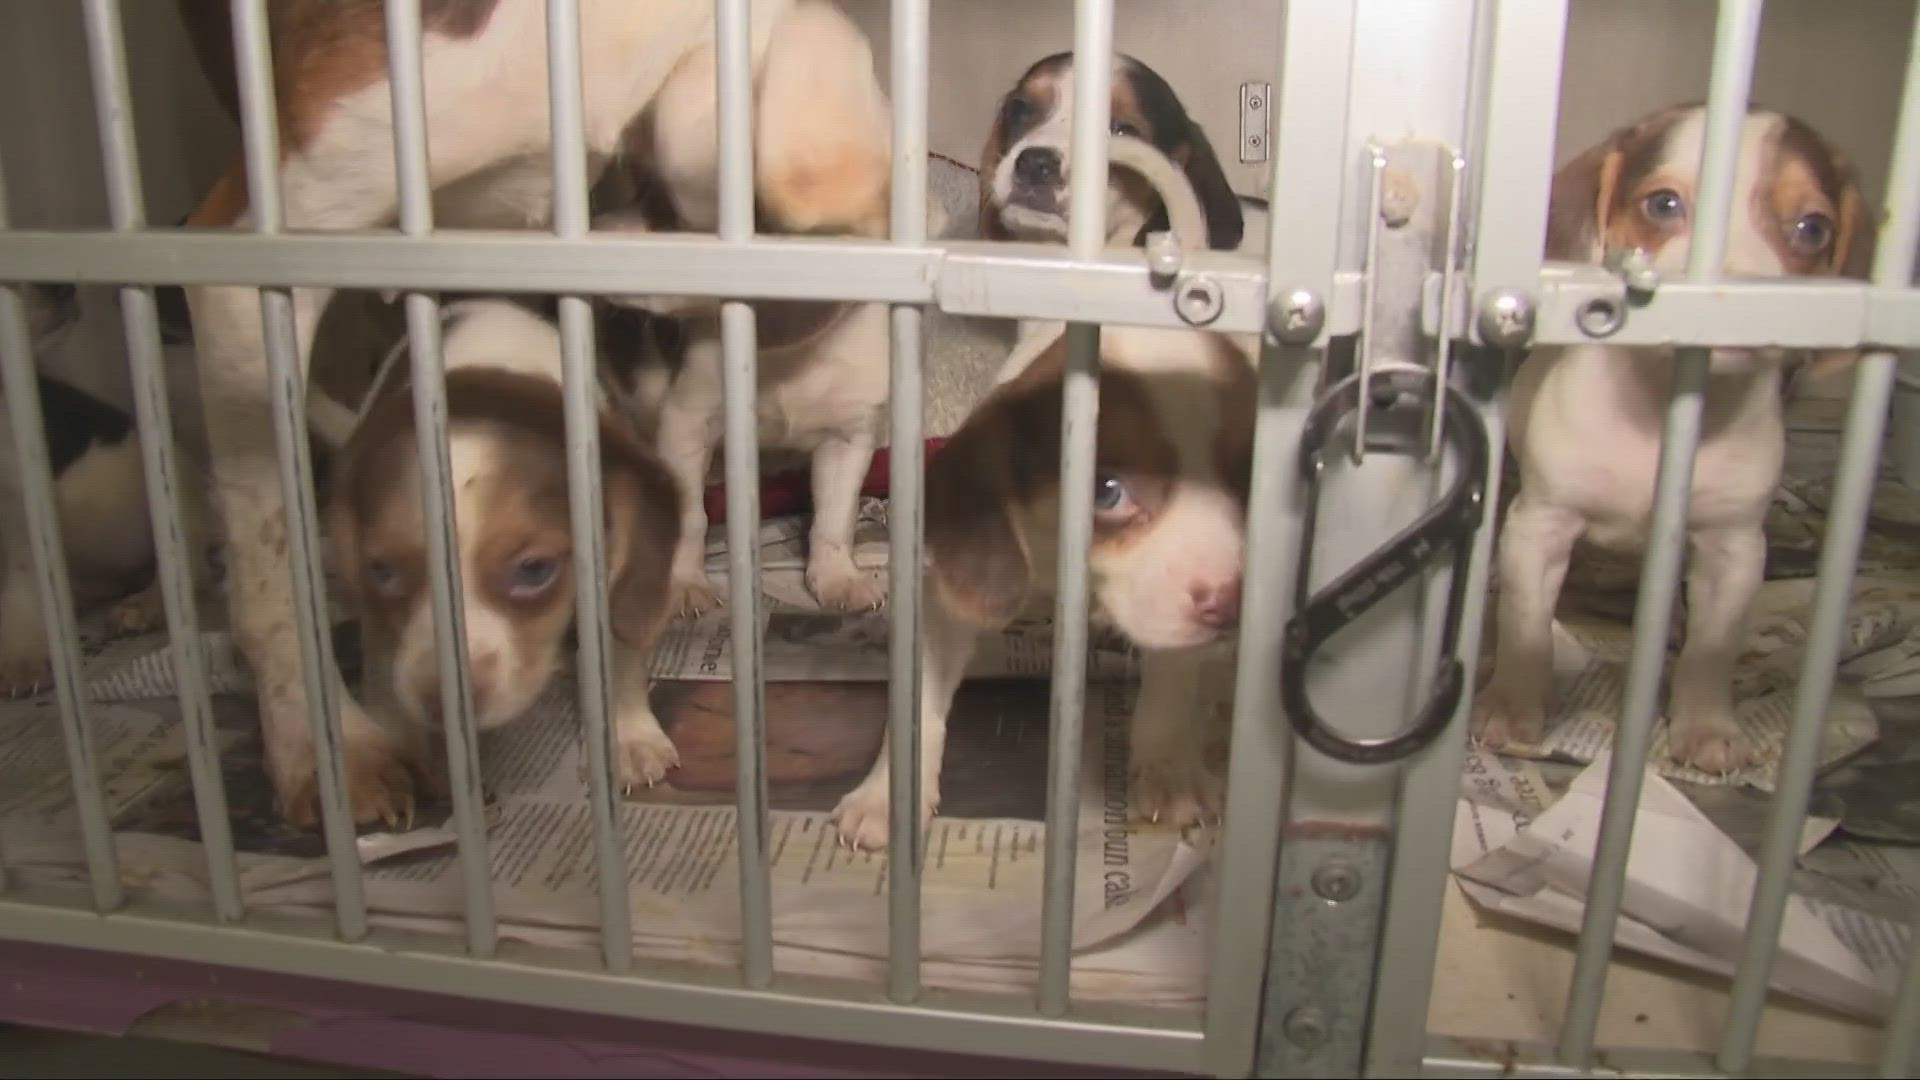 One dog has since died. The rest are currently at the Humane Society in Mansfield, which was already at capacity with 23 dogs before the rescue.